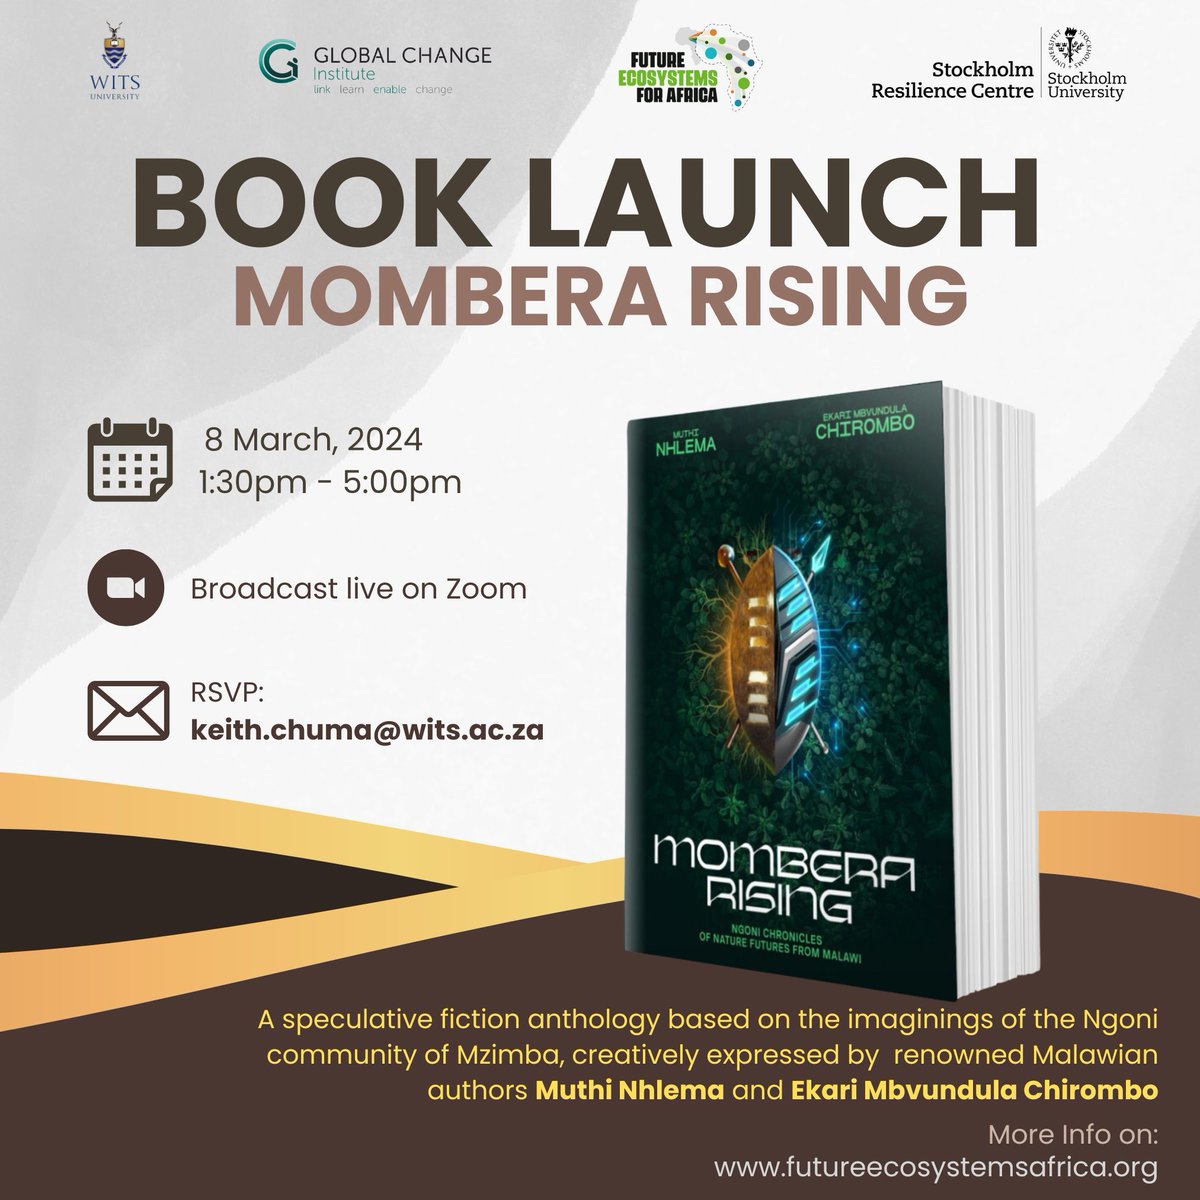 ✨ Join us for the thrilling launch of 'Mombera Rising'! Immerse yourself in in stories exploring sustainability with laser spears and hovercrafts. 🚀📖 The event will include readings, speeches and a panel. 🗓️ 8 March 🕰️ 13:30-15:30 SAST 🌐 Register: buff.ly/4bX6z